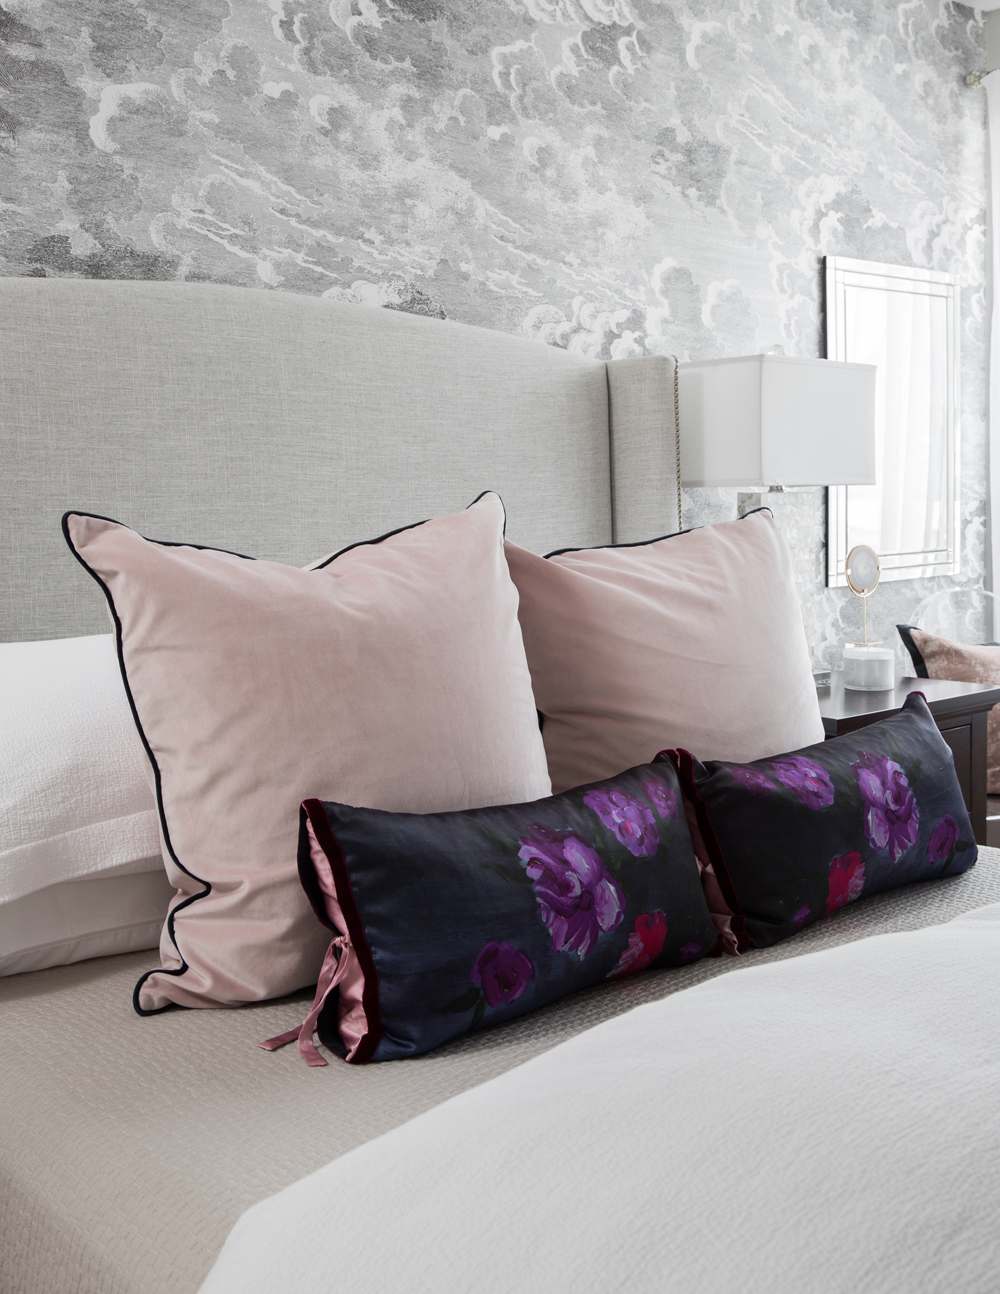 closeu up of bed with two large pink cushions with black trim and two dark floral smaller cushions in front